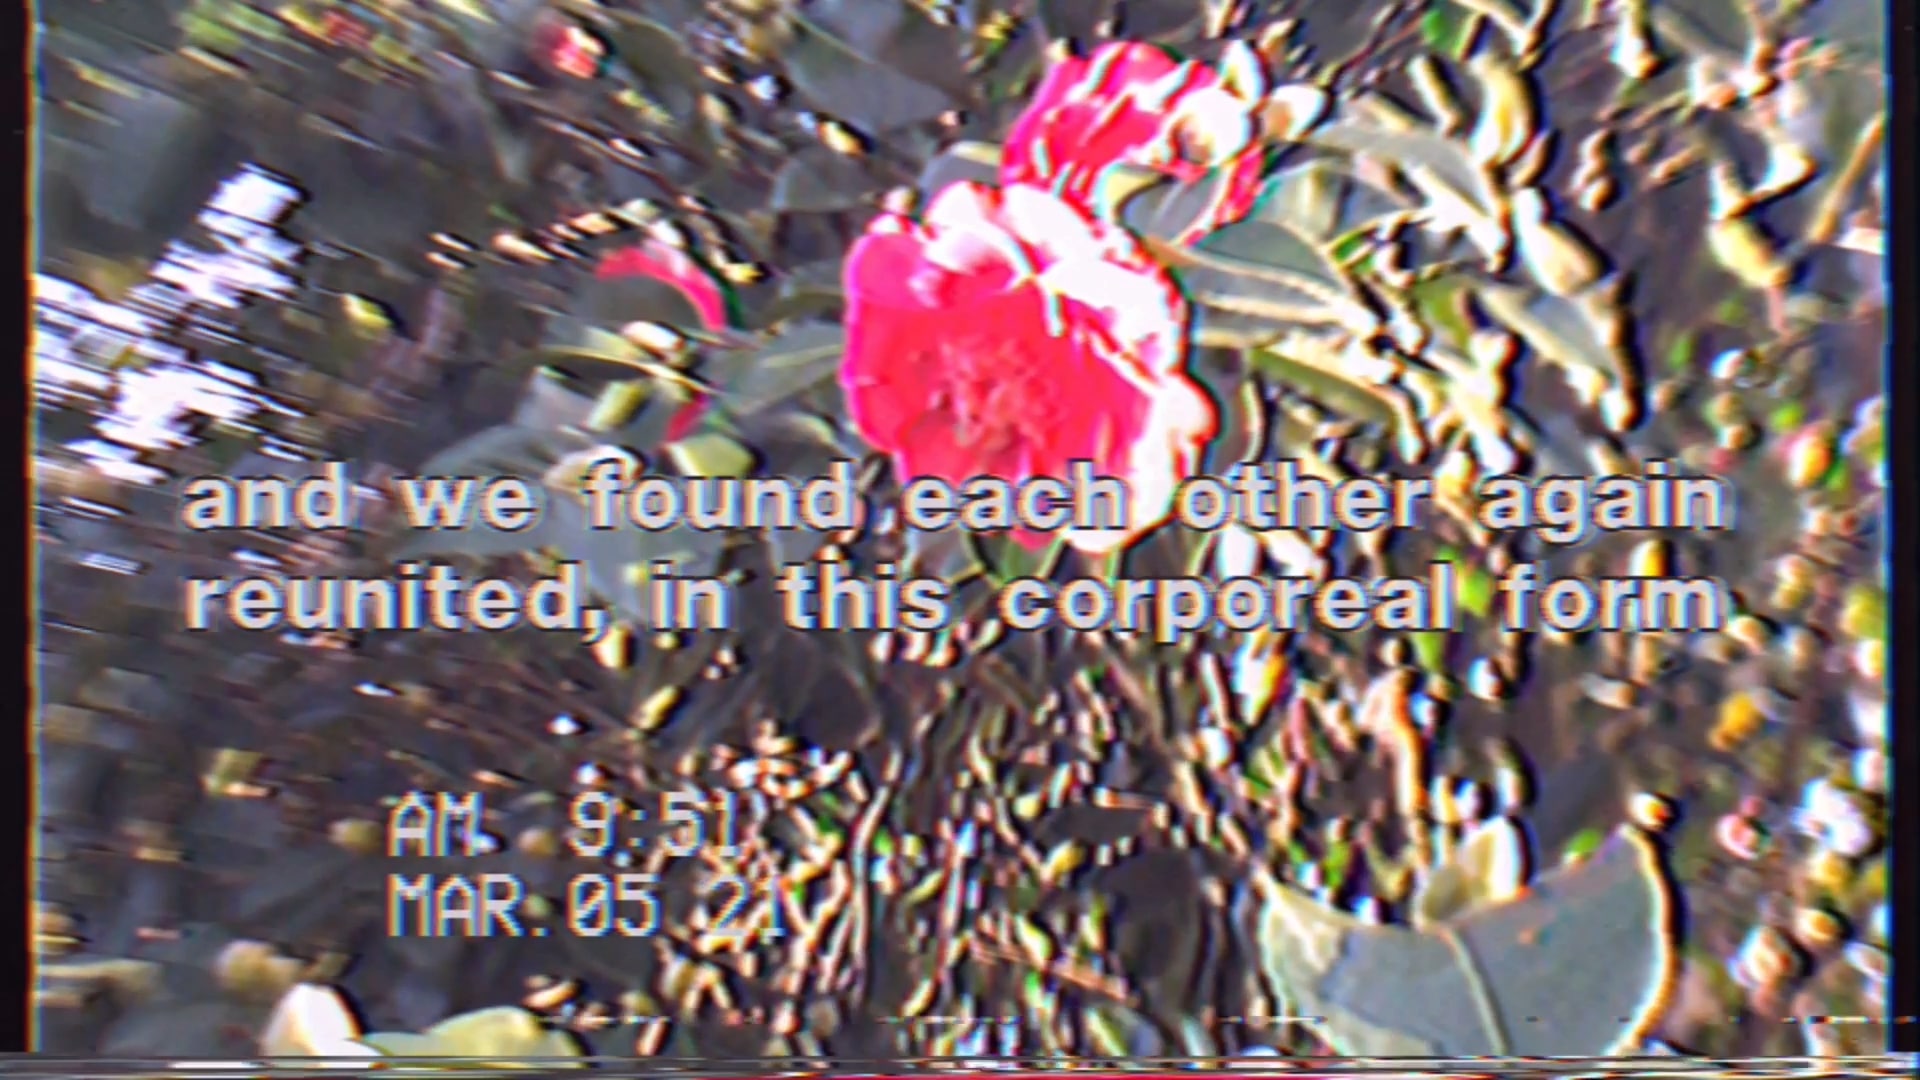 A blurry image of a neon pink flower as it hangs almost in the center of the frame, surrounded by leaves. The text in the middle of the screen reads: “and we found each other again / reunited, in this corporeal form.” The timestamp on the video says that it was taken March 05th, 2021 at 9:51am.